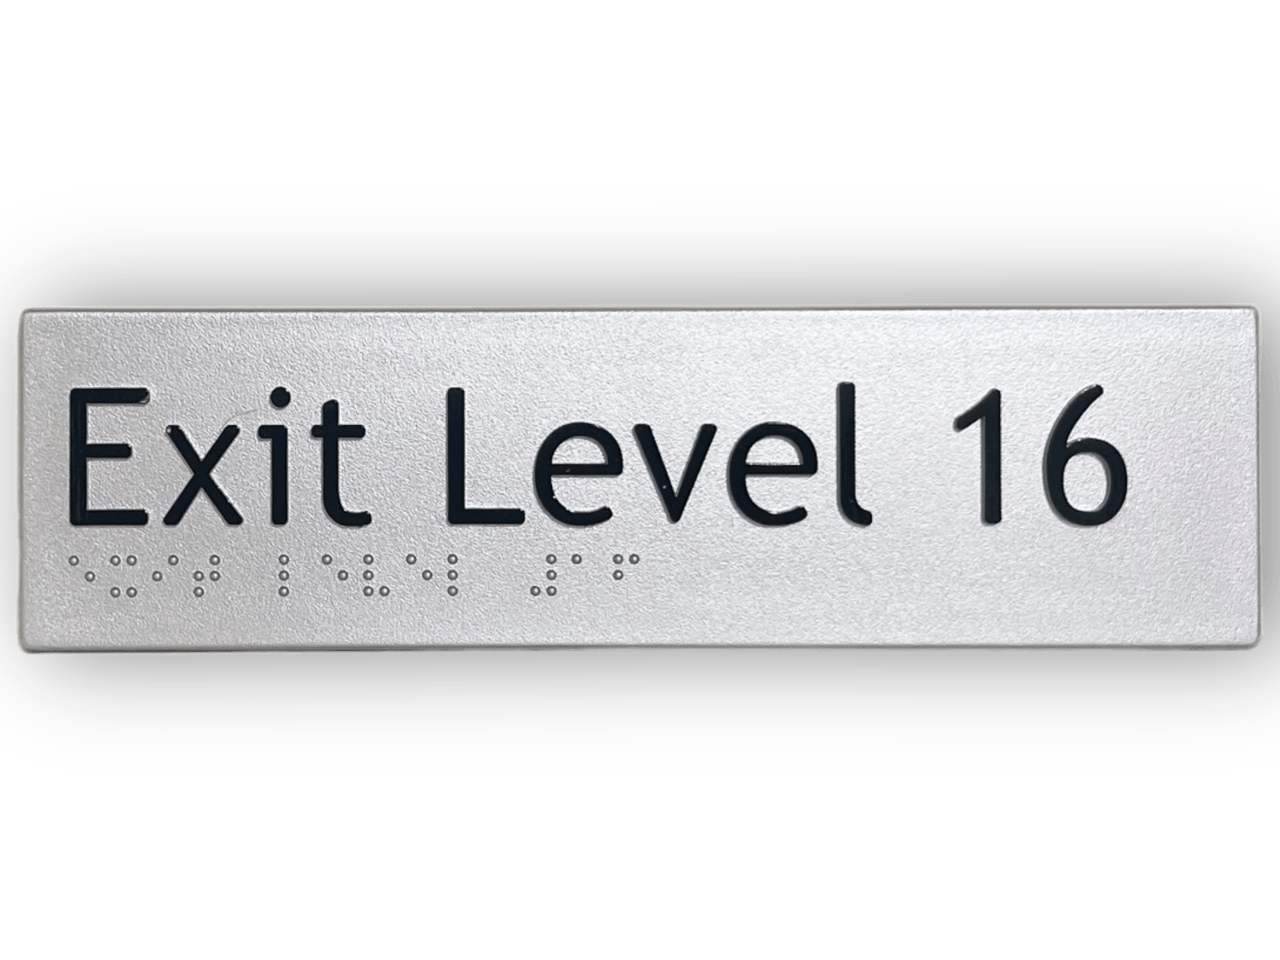 BRAILLE EXIT LEVEL 16 SIGN